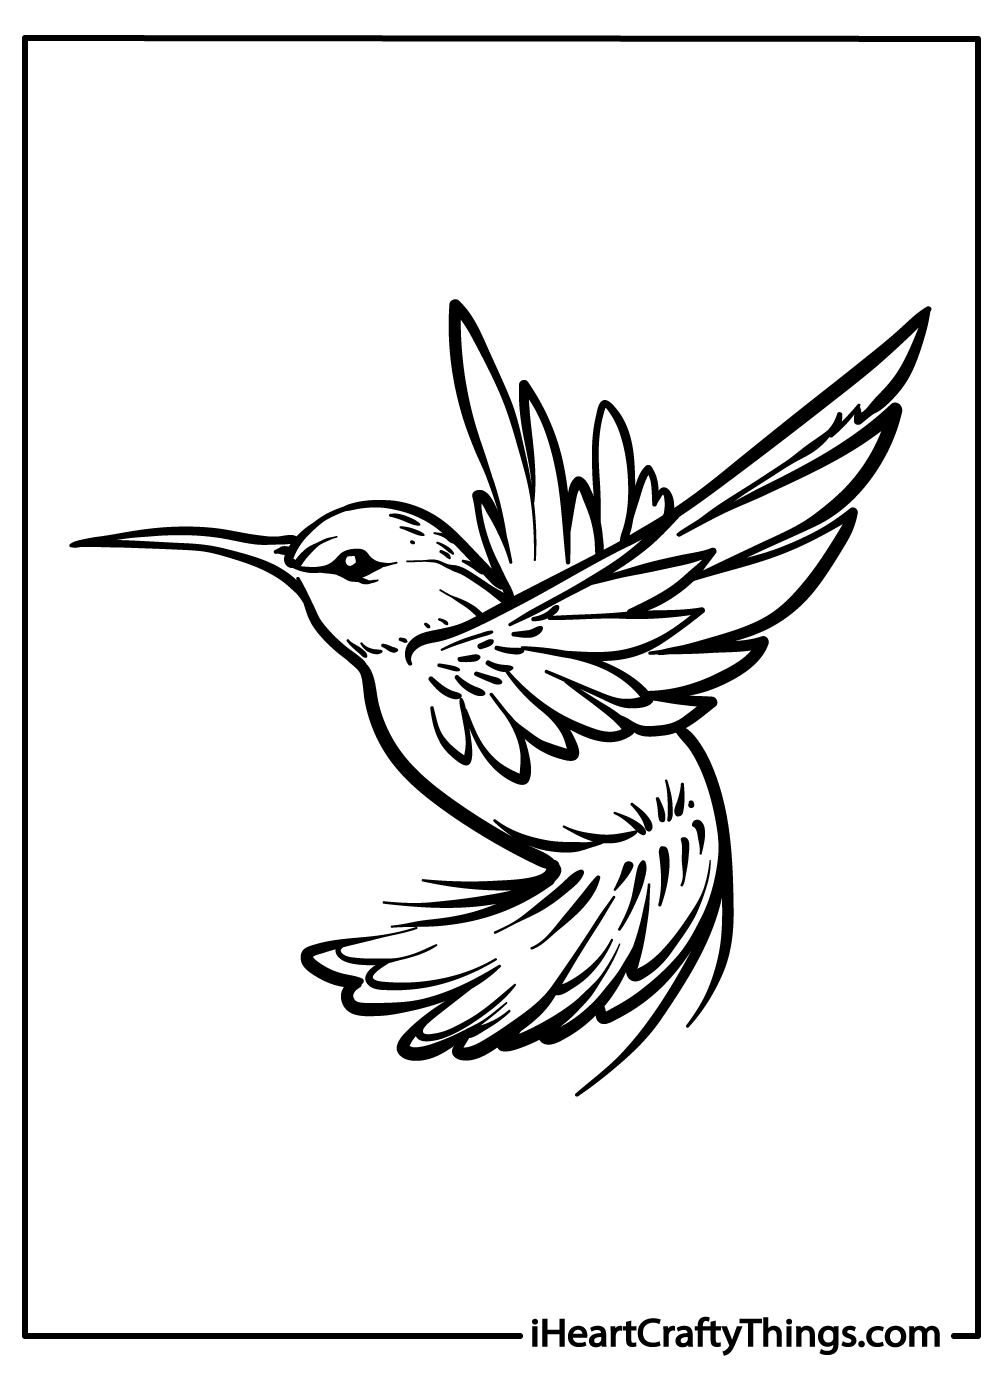 Original Hummingbird Coloring Pages for Kids